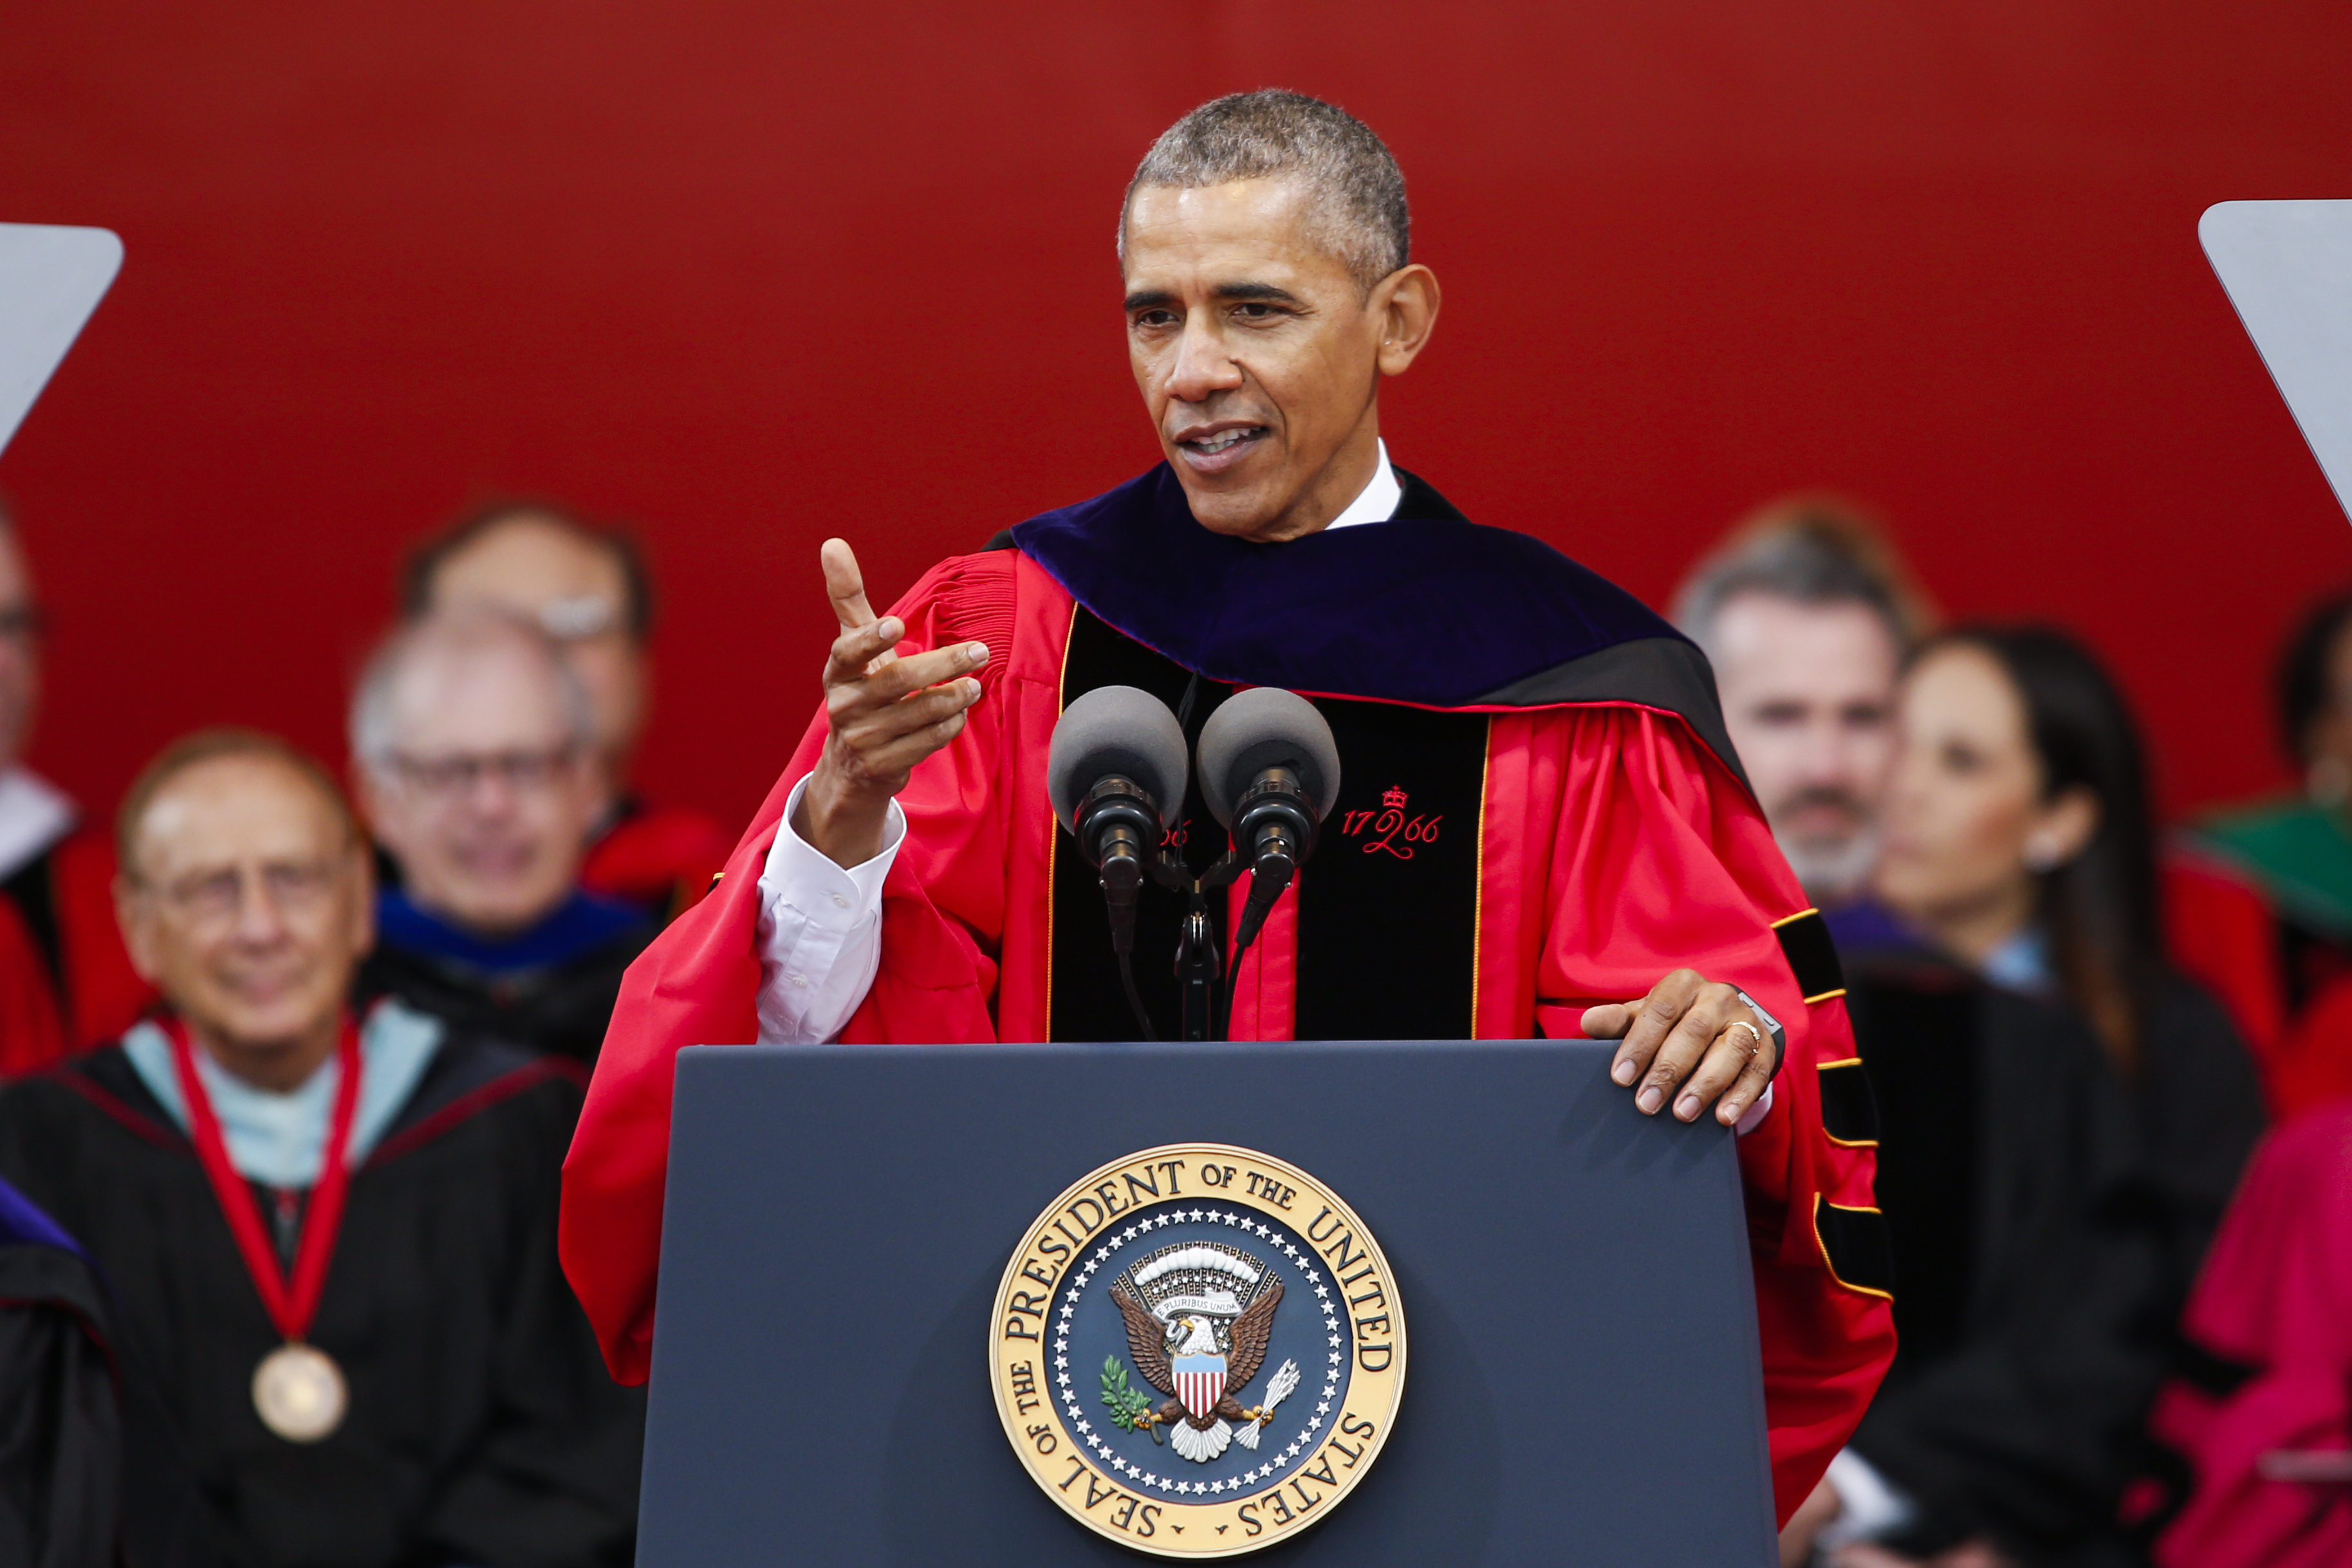 Obama Delivers Commencement Address At Rutgers University